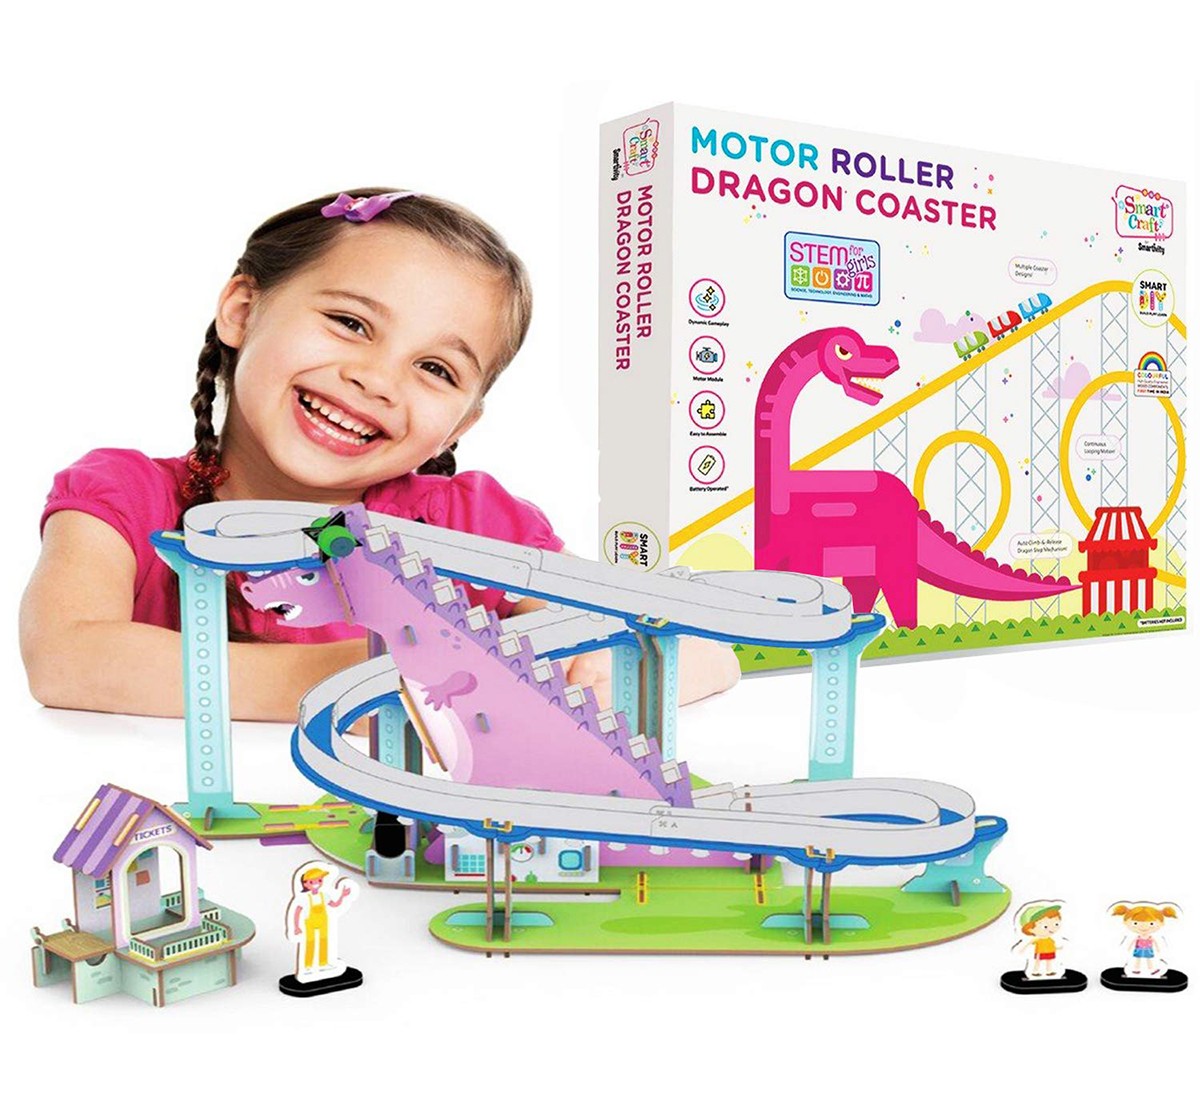 Smartivity Motor Roller Dragon Coaster: Stem, Diy, Educational, Learning, Building and Construction Toy for Kids age 6Y+ 